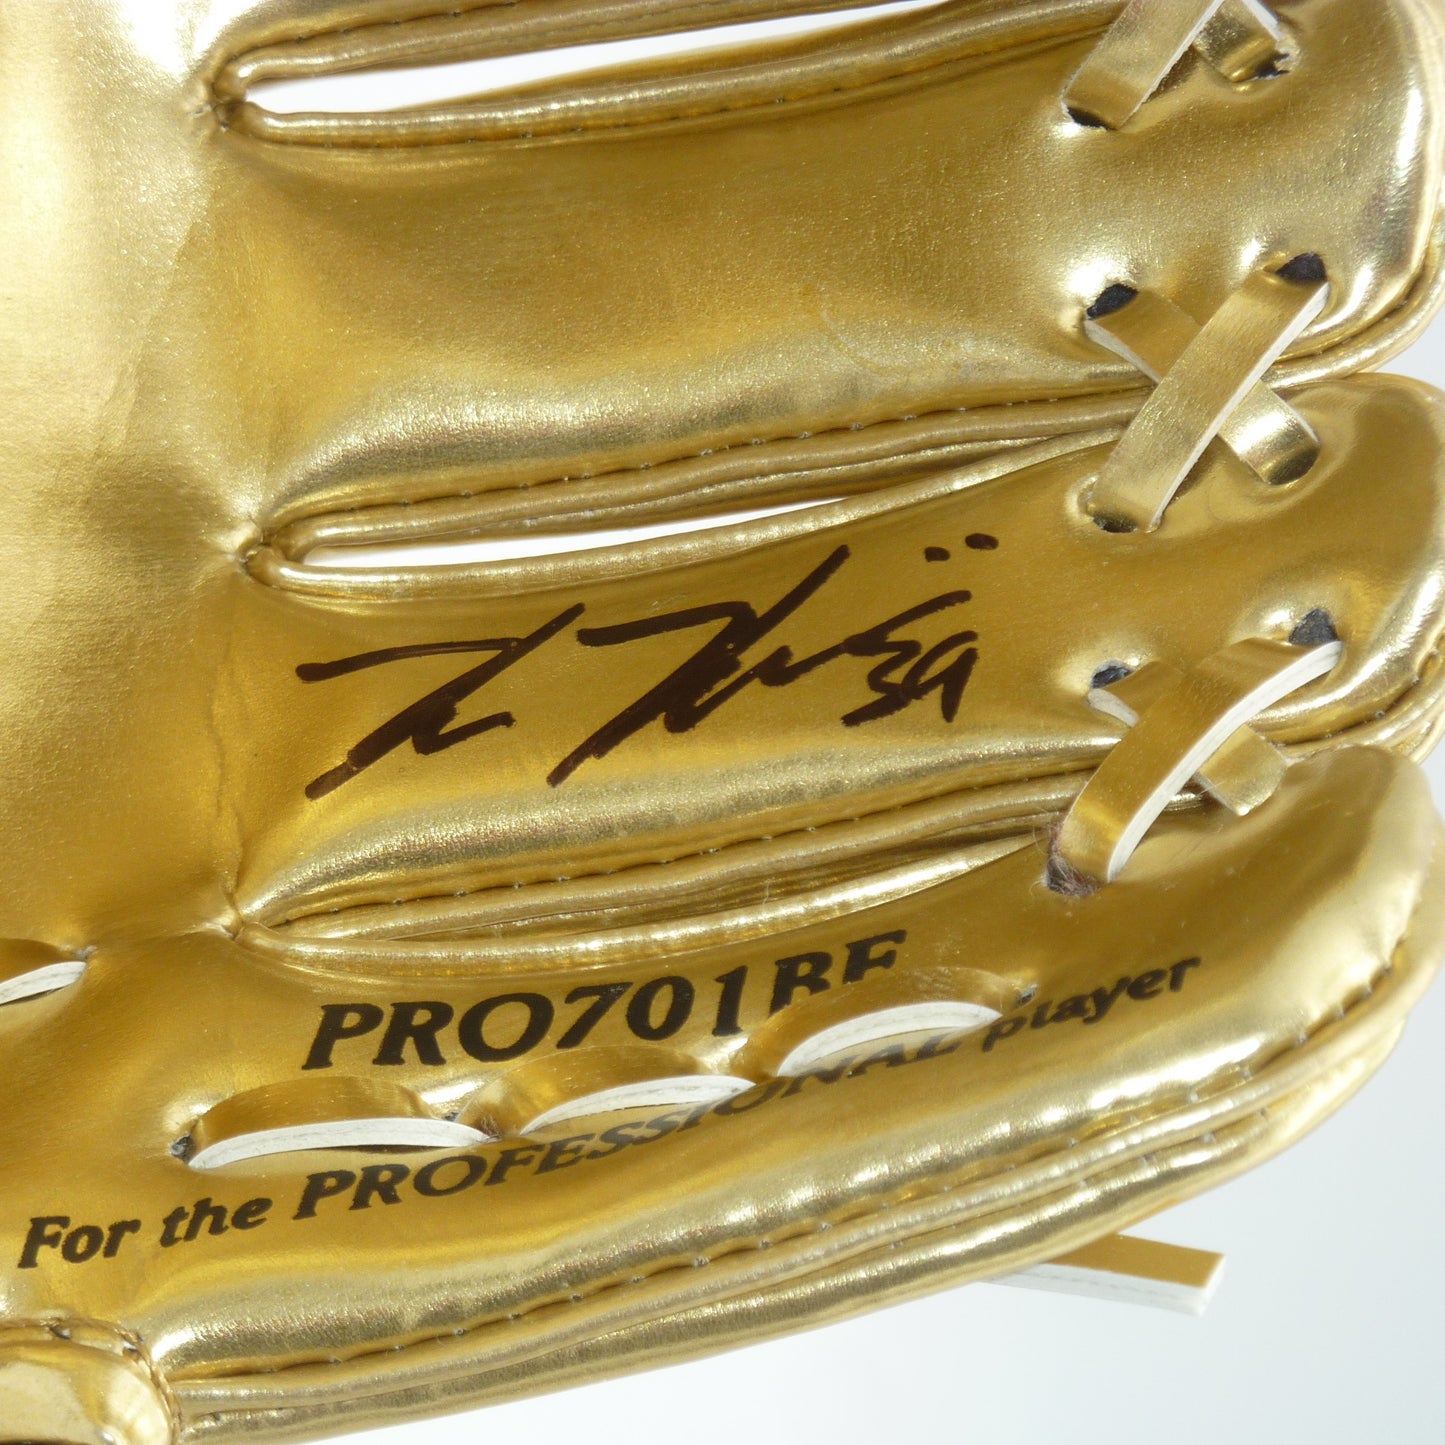 Kevin Kiermaier Autographed Gold Glove Statue Trophy - Tampa Bay Rays - JSA